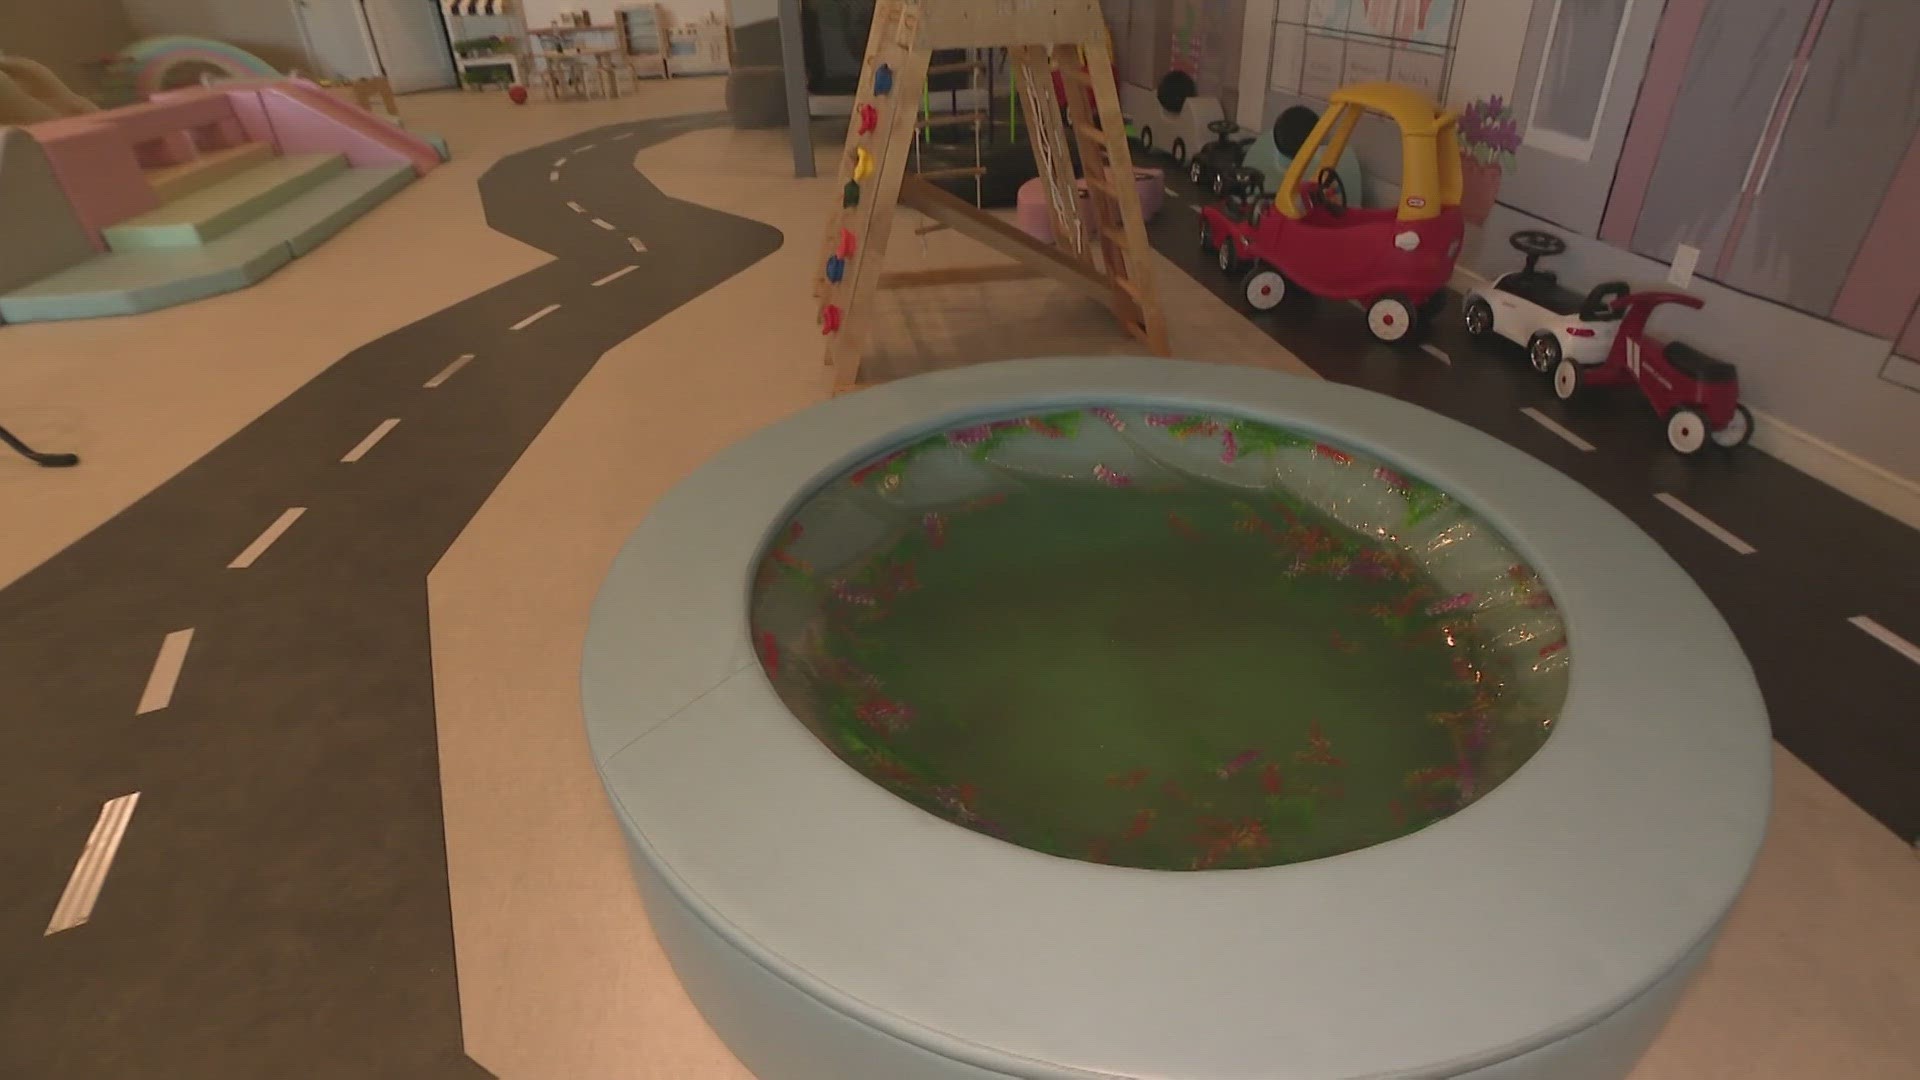 The space offers sensory-friendly play experiences for Valley children.